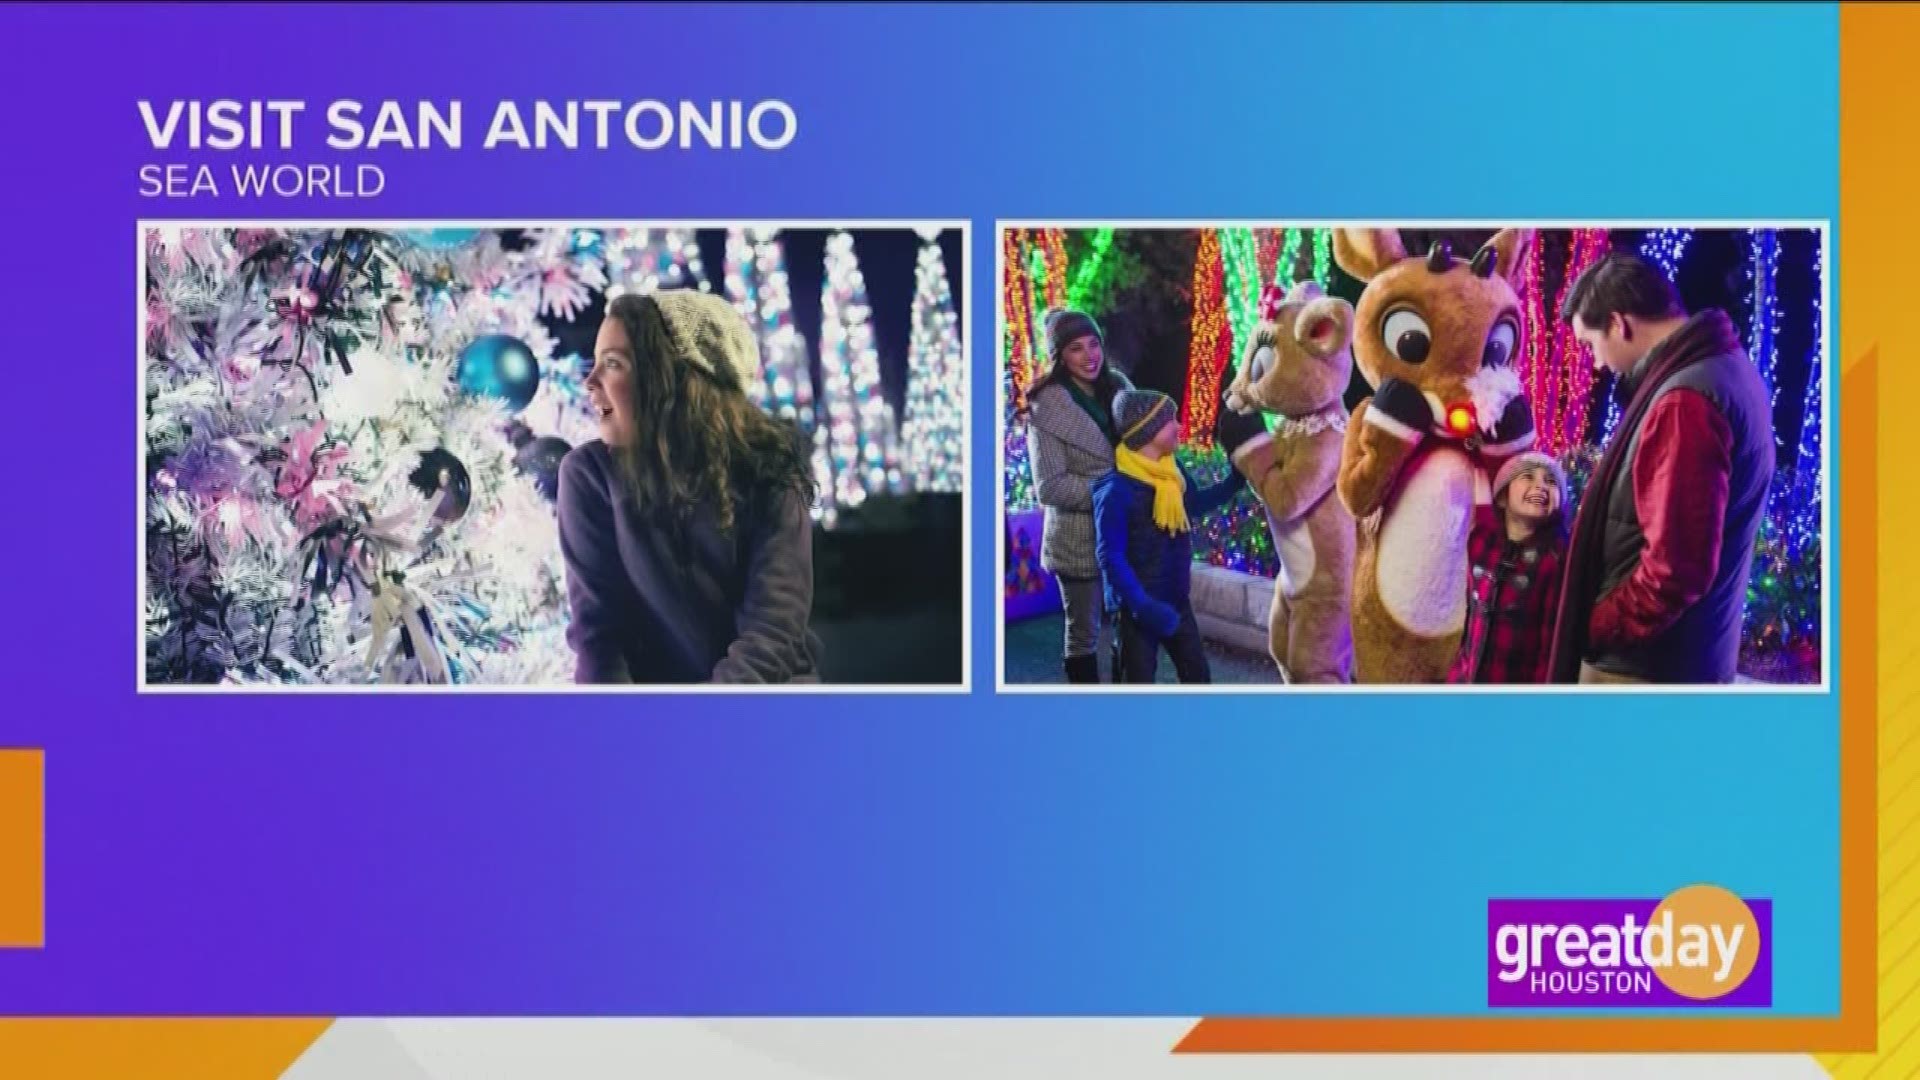 Visit San Antonio for theme parks, The Riverwalk, amazing food and lights throughout the city.